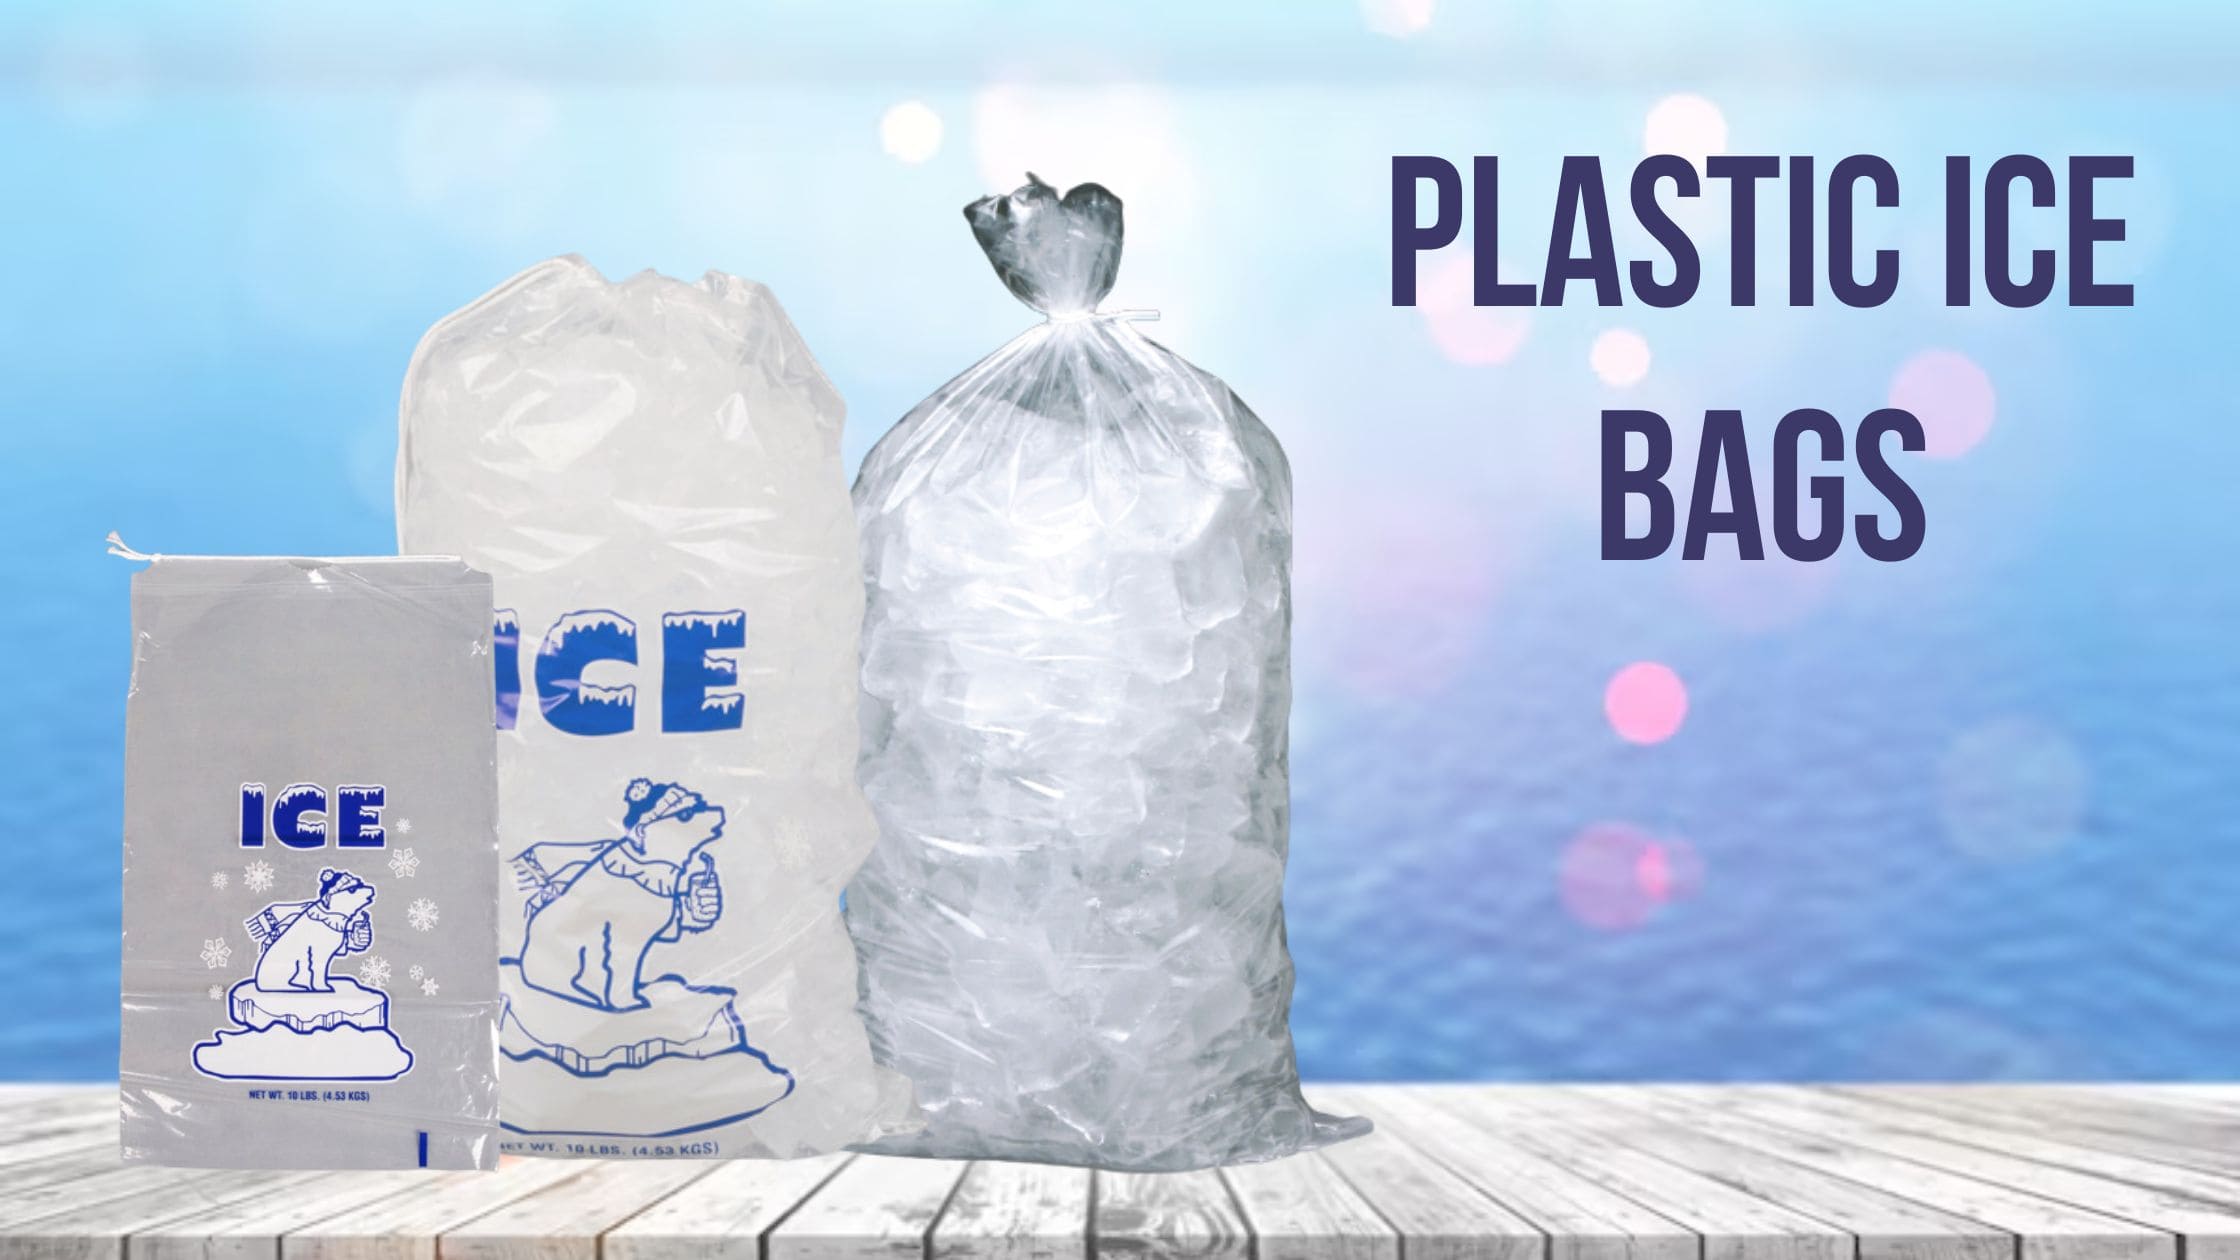 Will Canada's Single-Use Plastic Bag Ban Make a Difference? - CB